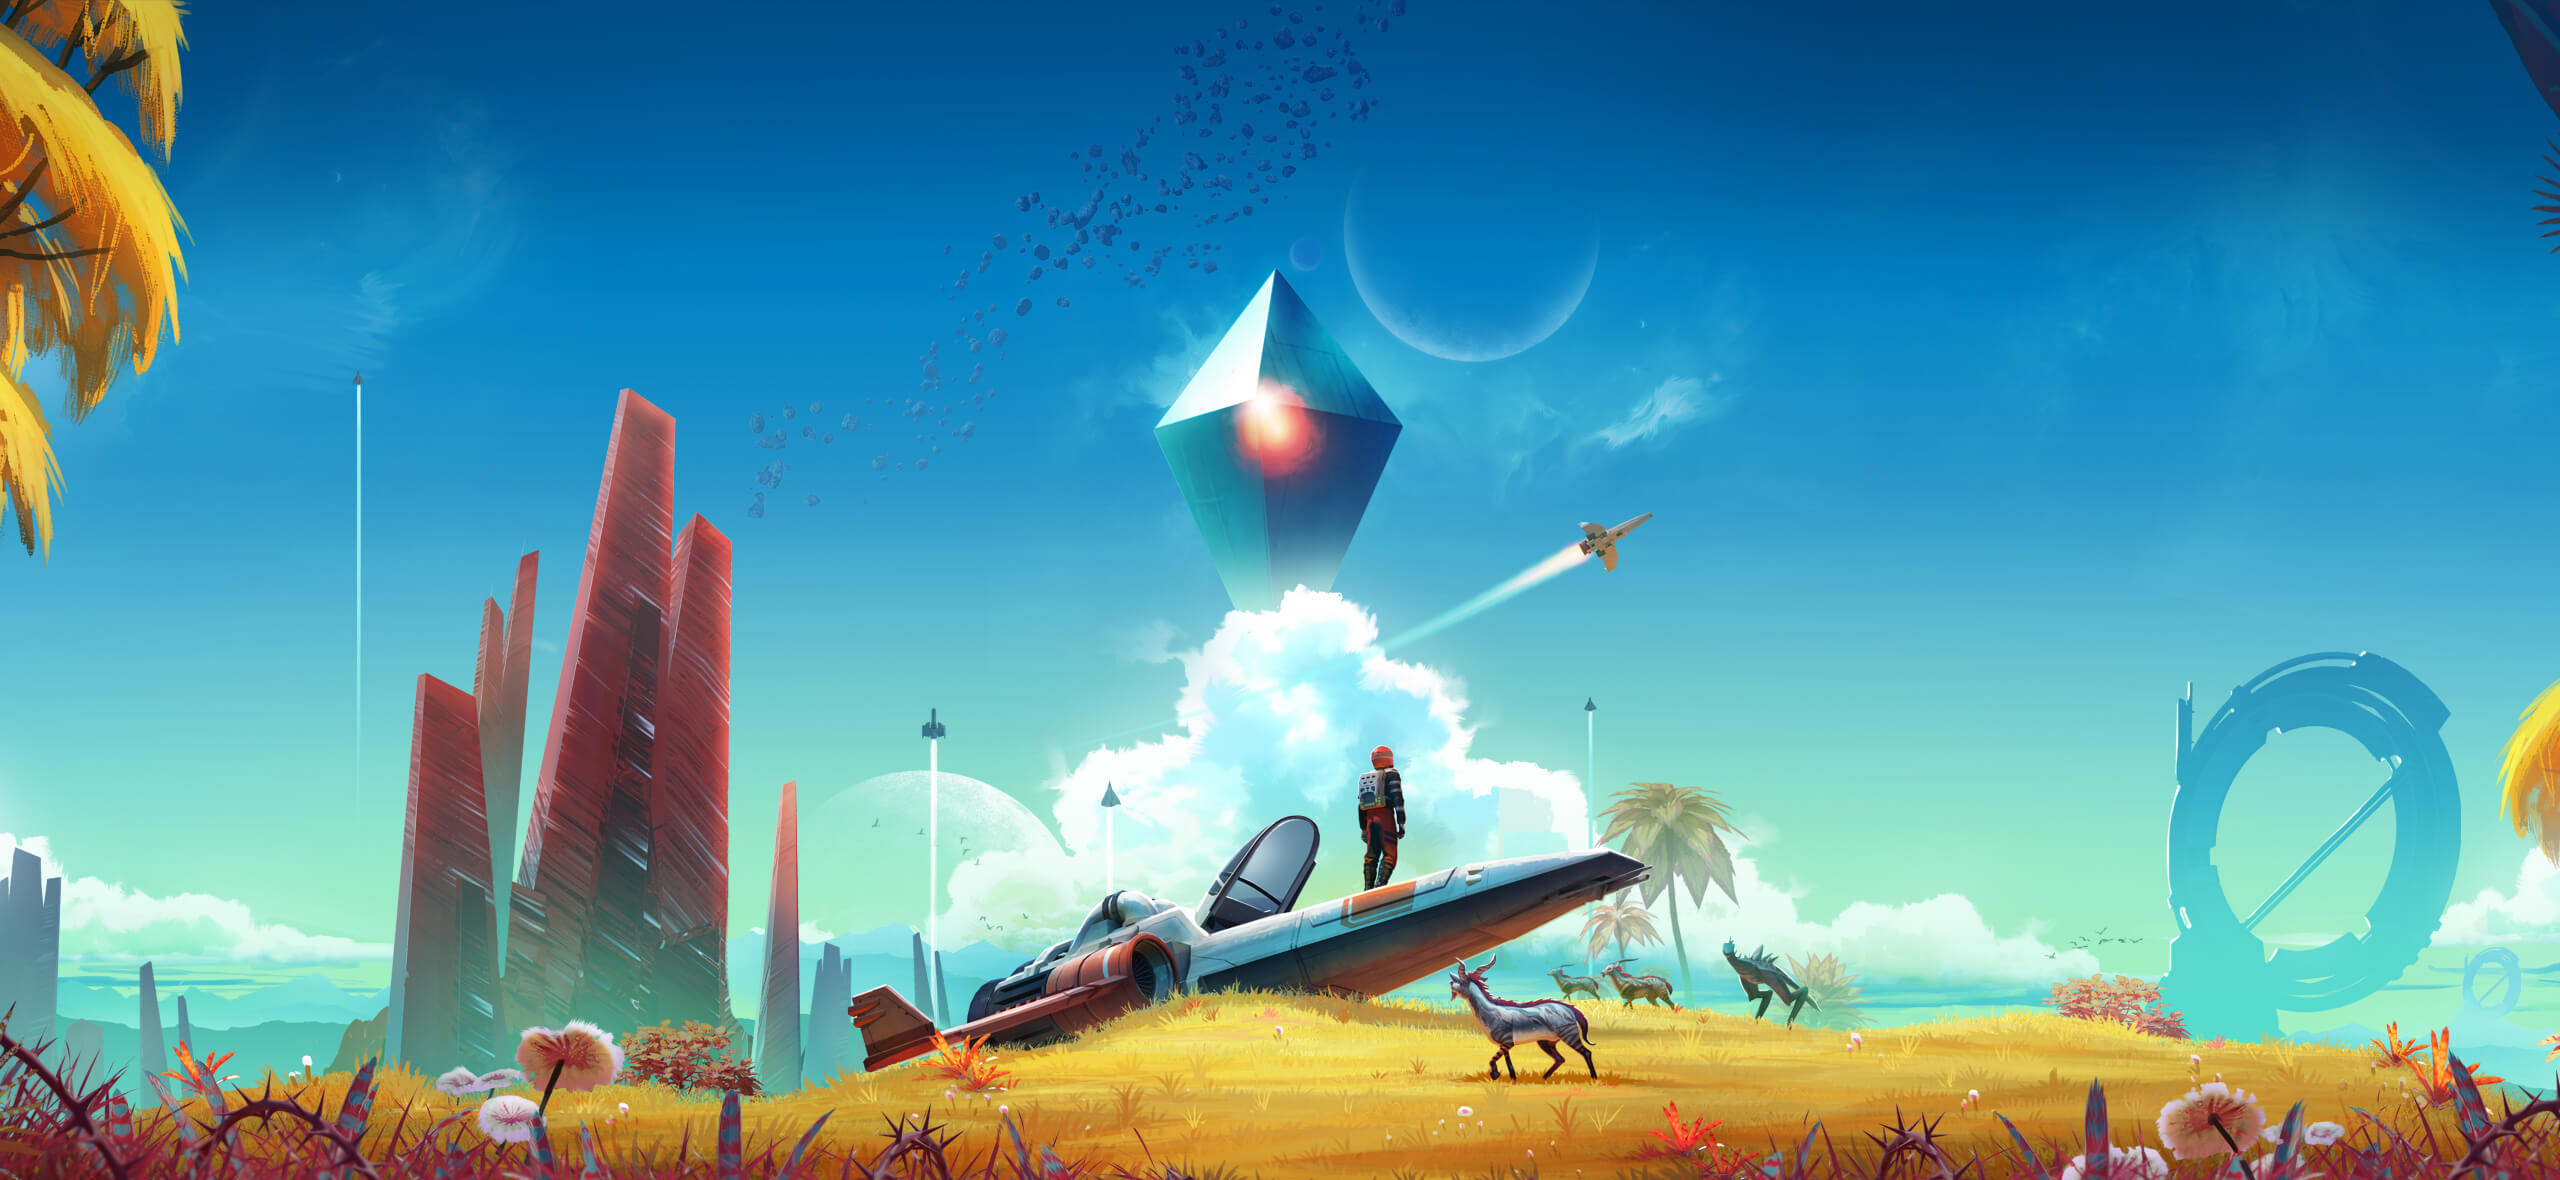 No Mans Sky Video Game, HD Games, 4k Wallpapers, Images, Backgrounds